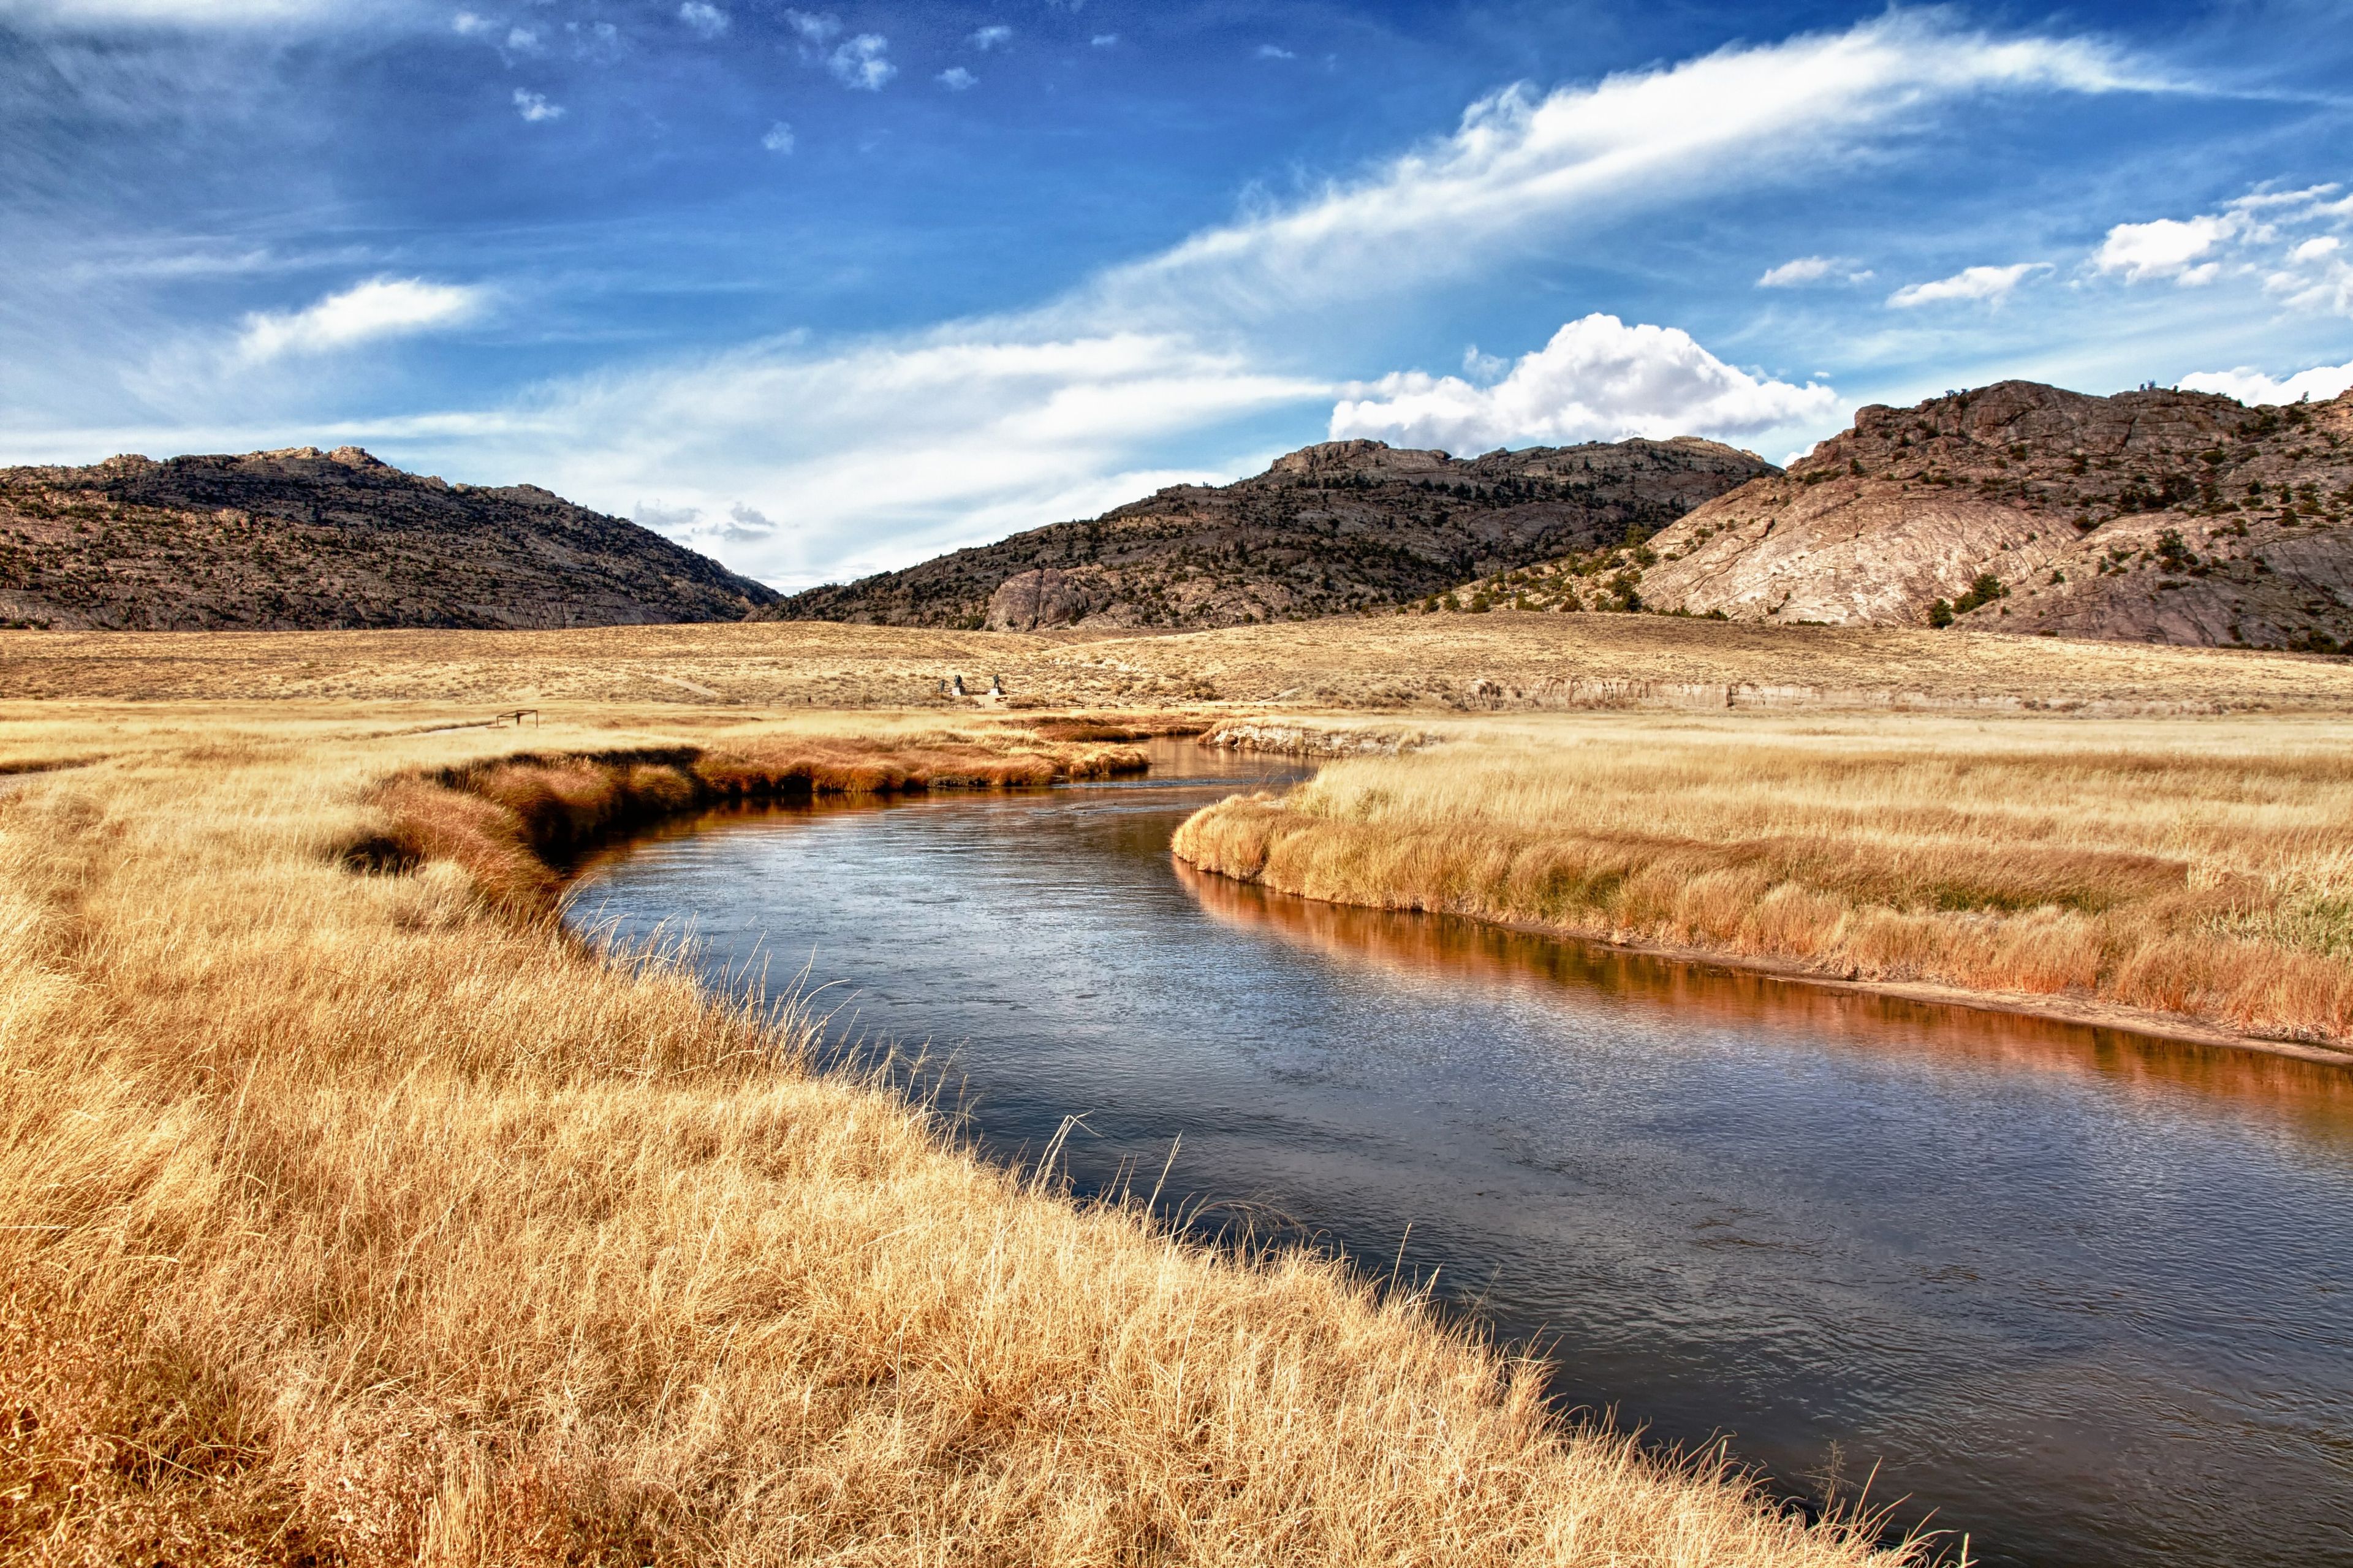 The Sweetwater River runs through a grassy meadow.